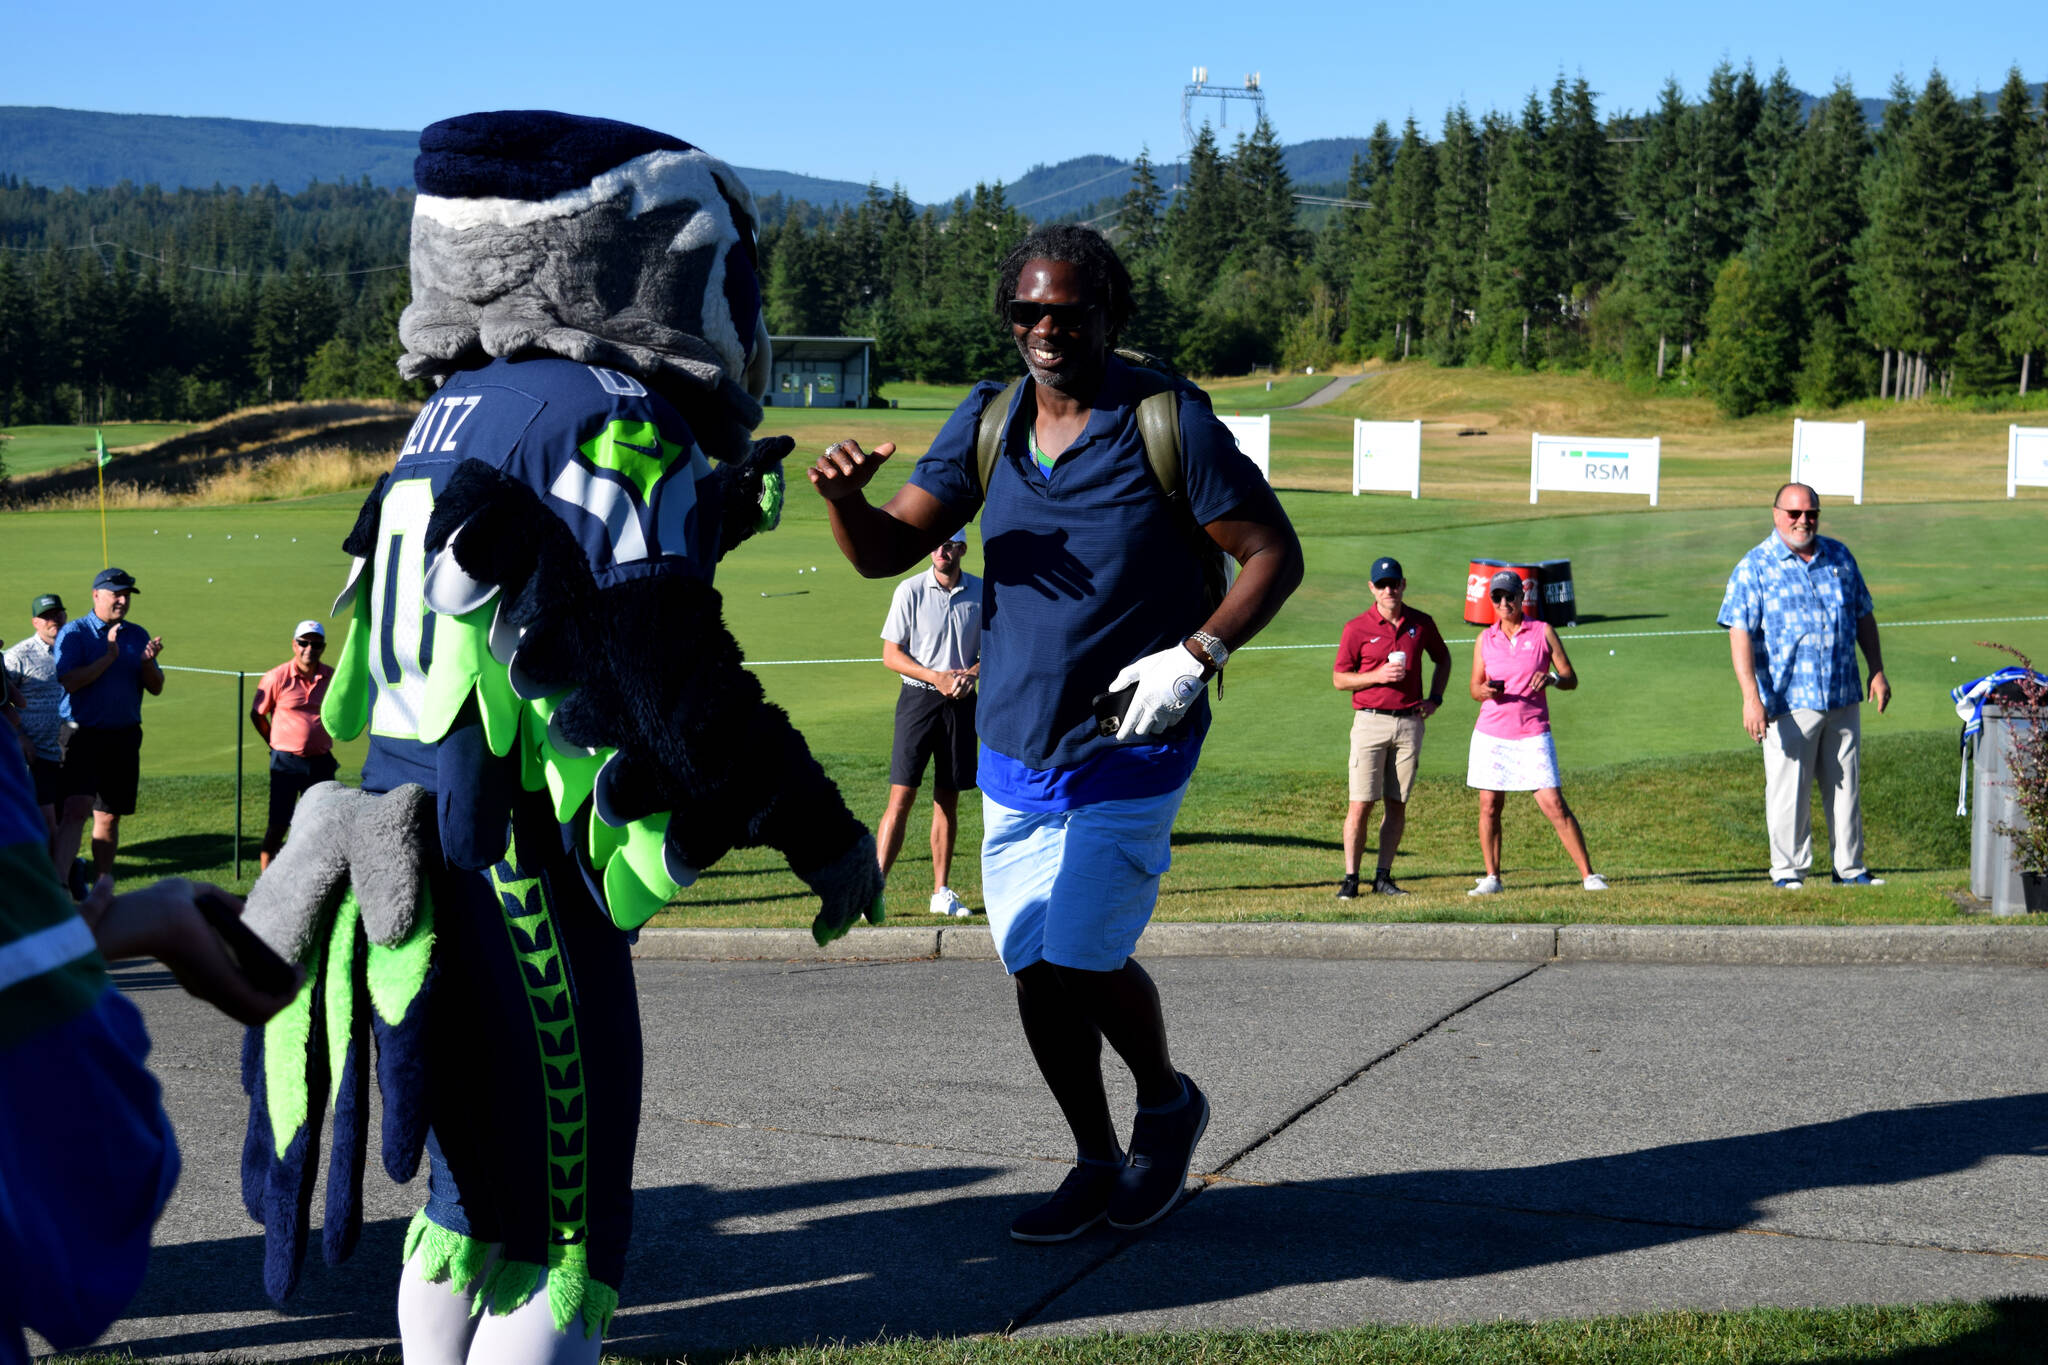 The Seahawks Rumble at the The Ridge charity fundraiser was held Aug. 8. Photo by Conor Wilson/Valley Record